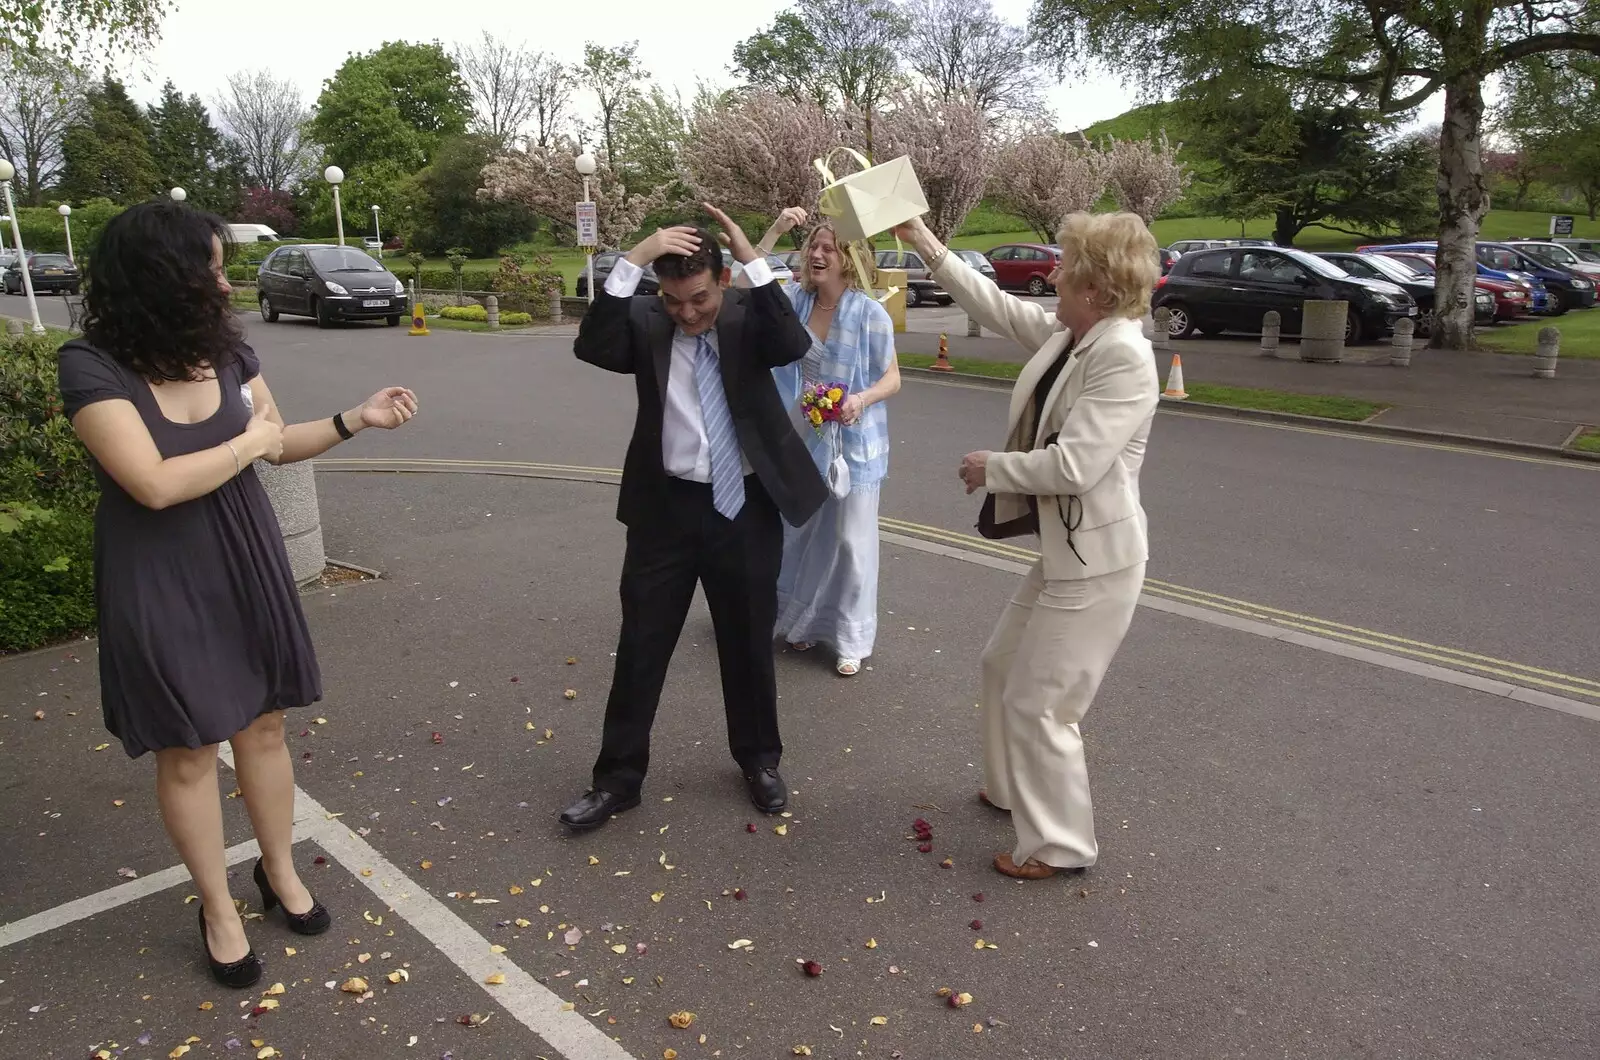 The remains of the confetti is tipped on Hani, from Hani and Anne's Wedding, County Hall, Cambridge - 2nd May 2008